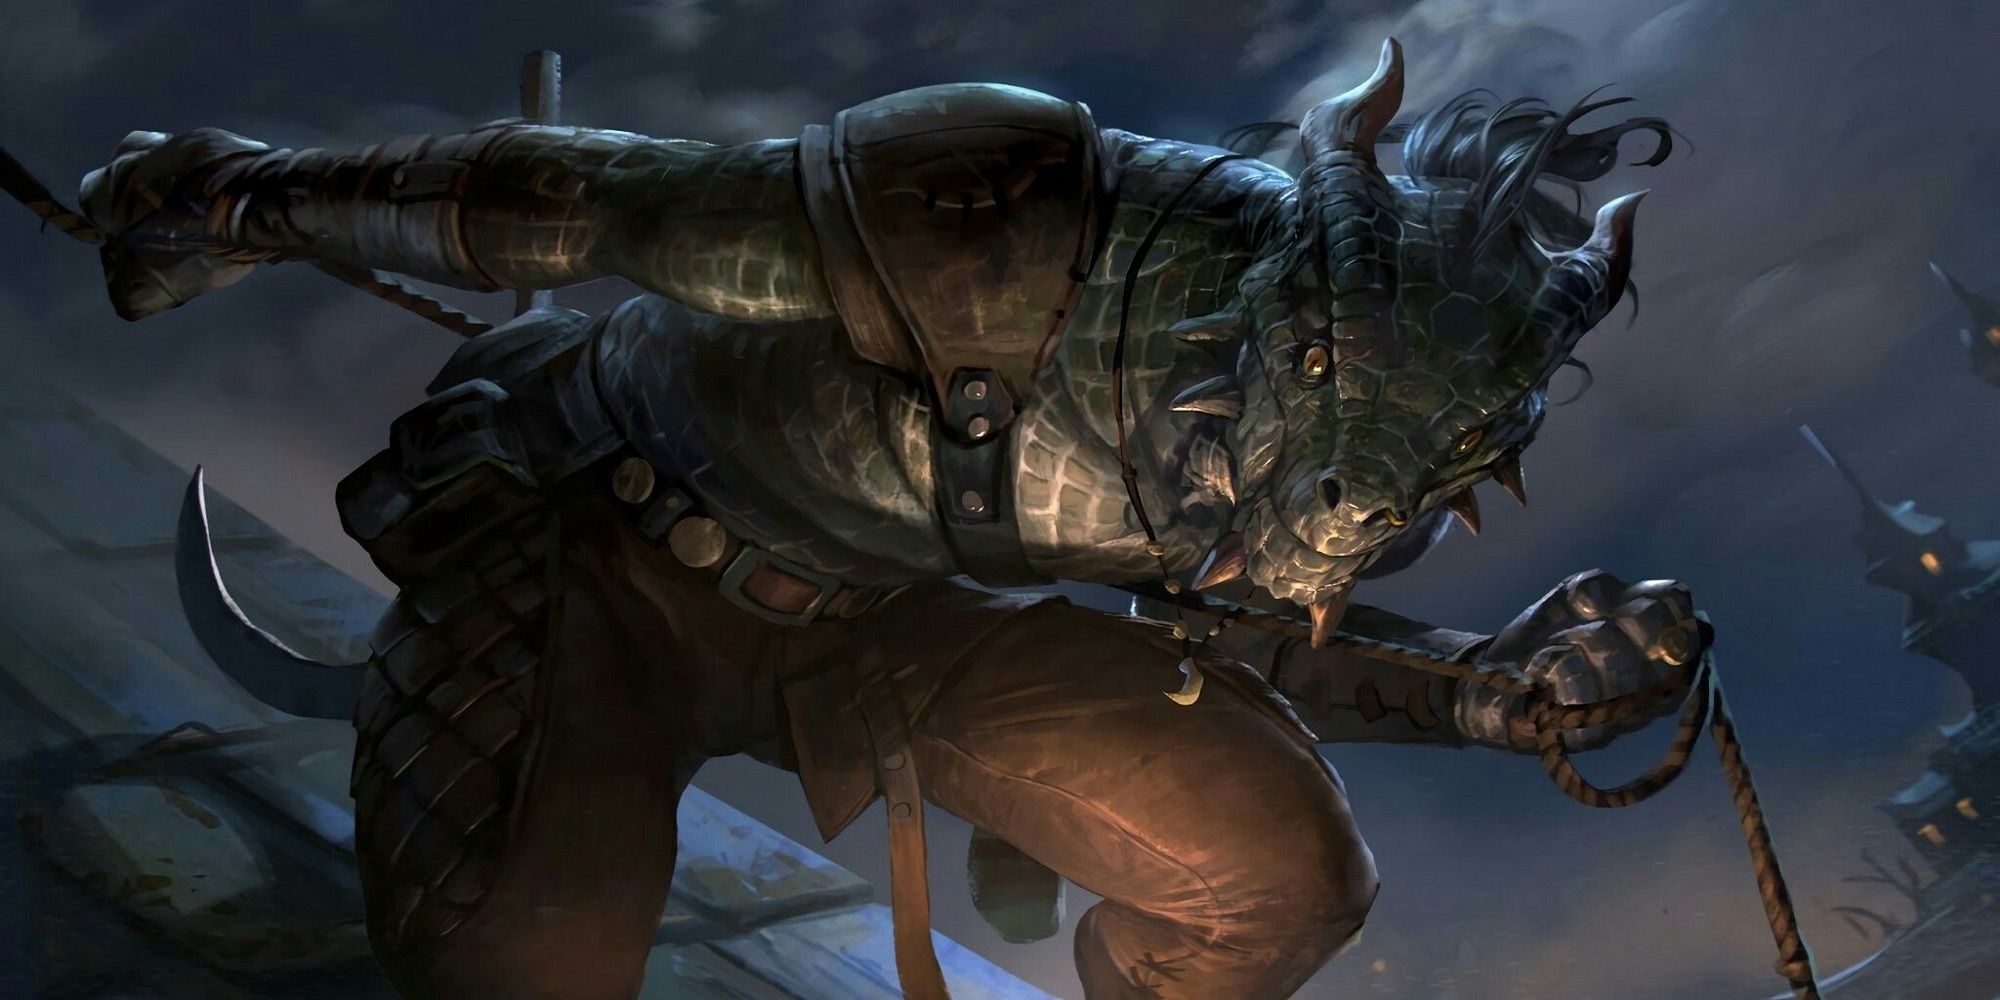 Elder Scrolls Argonian Thief On The Side Of A Building About To Enter A Window Nighttime Full Moon